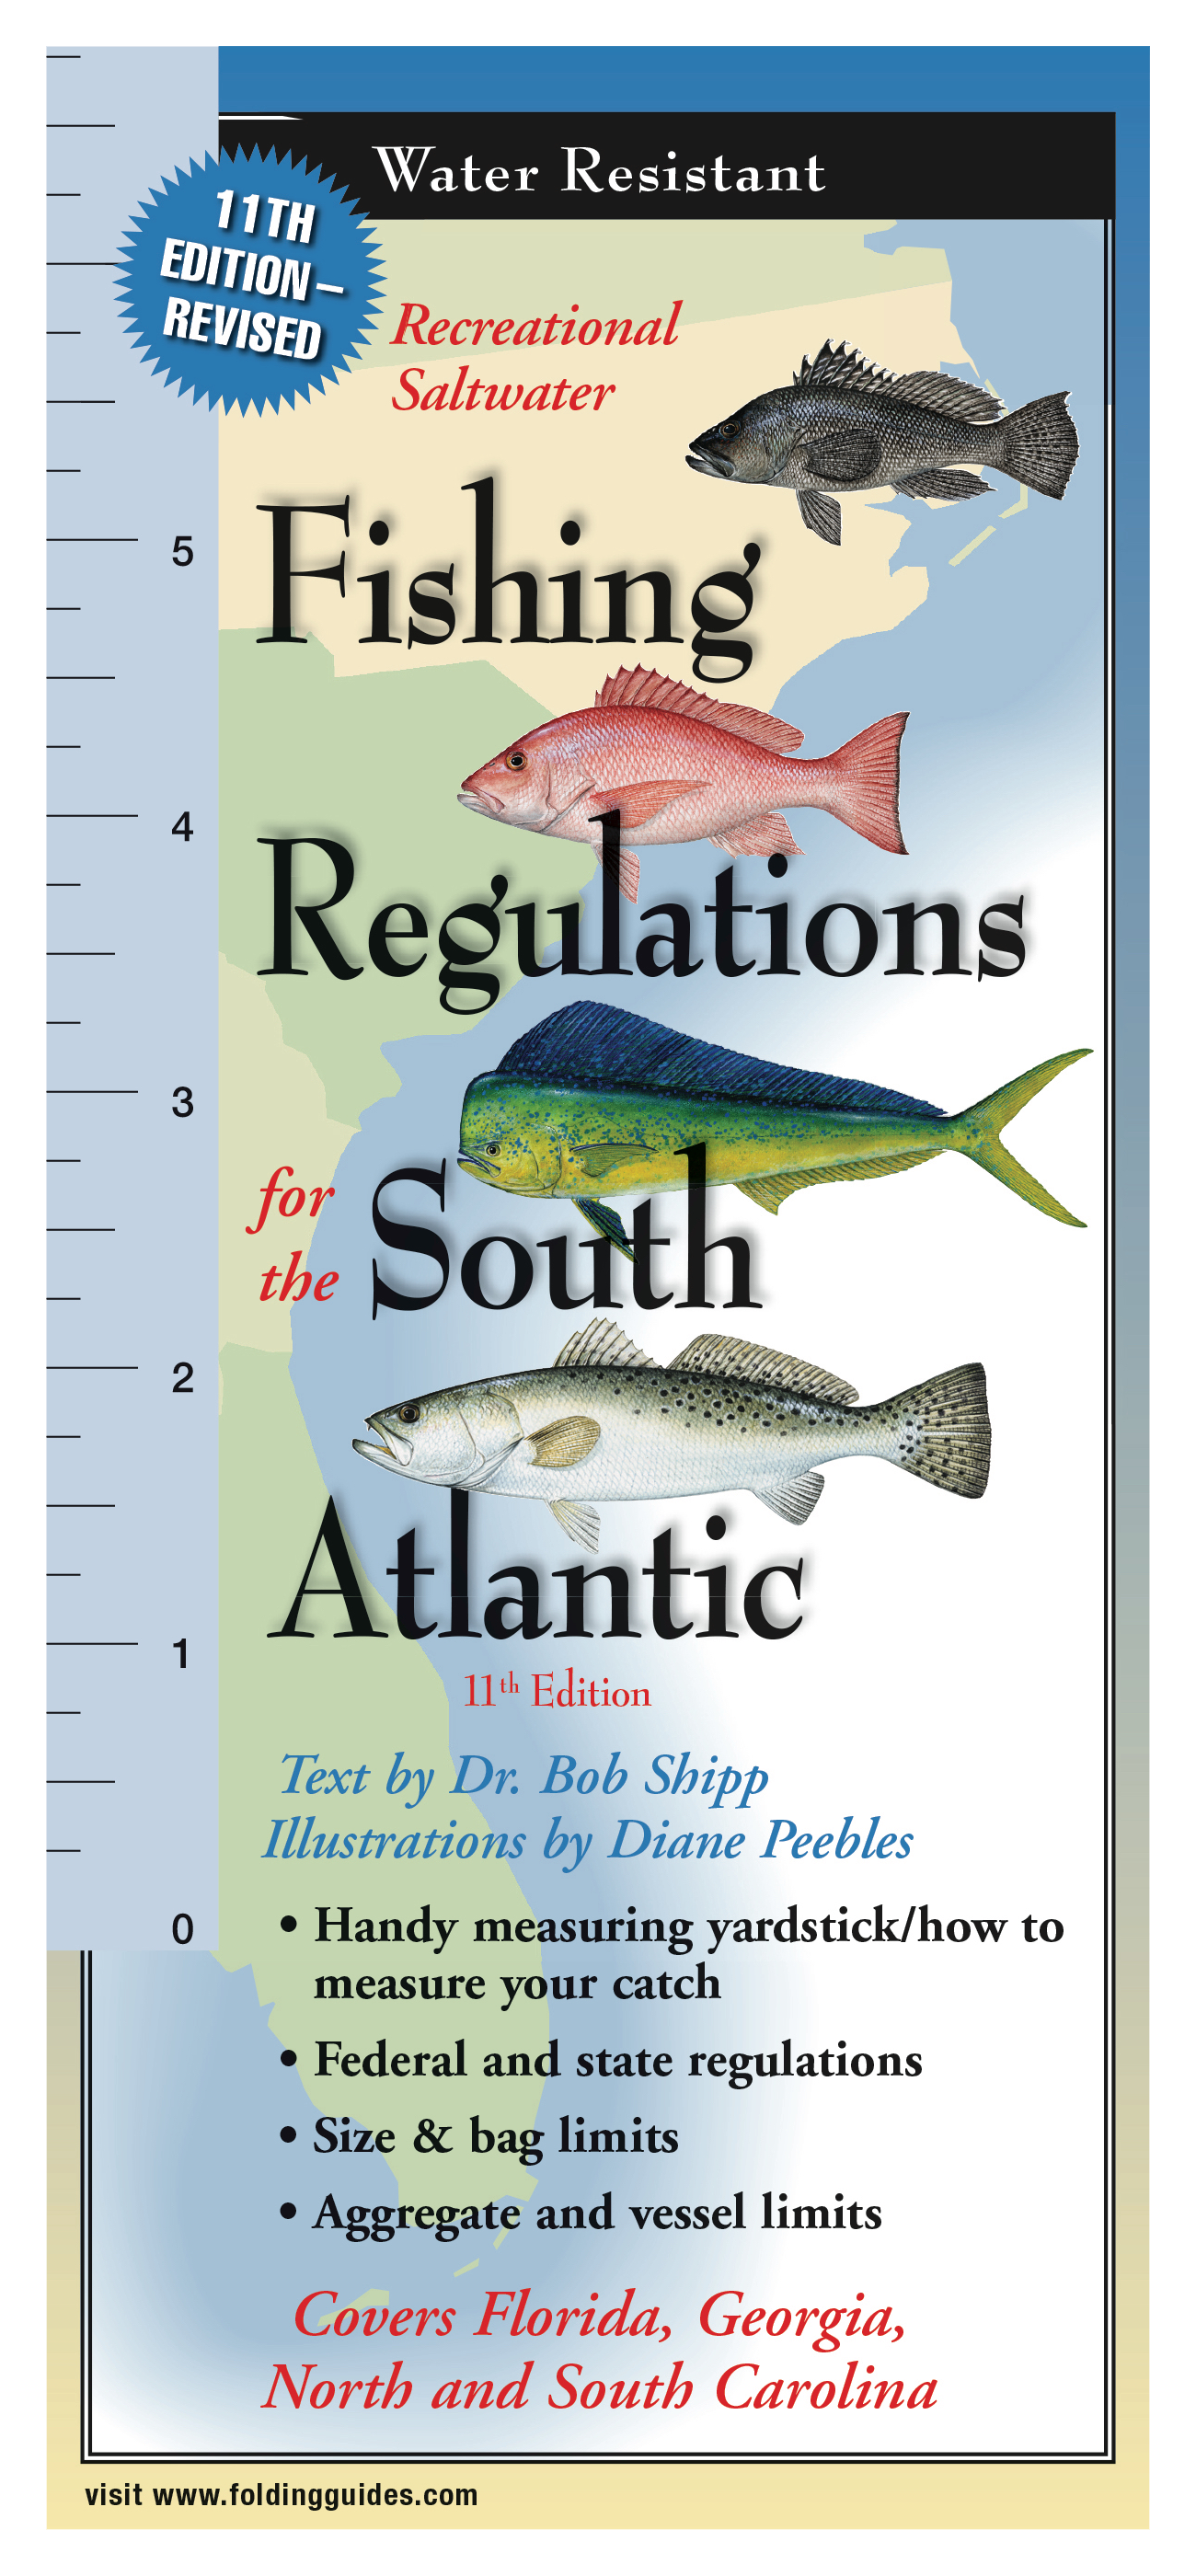 Fishing Regulations for the South Atlantic Laminated Folding Guide - 11th  Edition by Bob Shipp and Diane Peebles